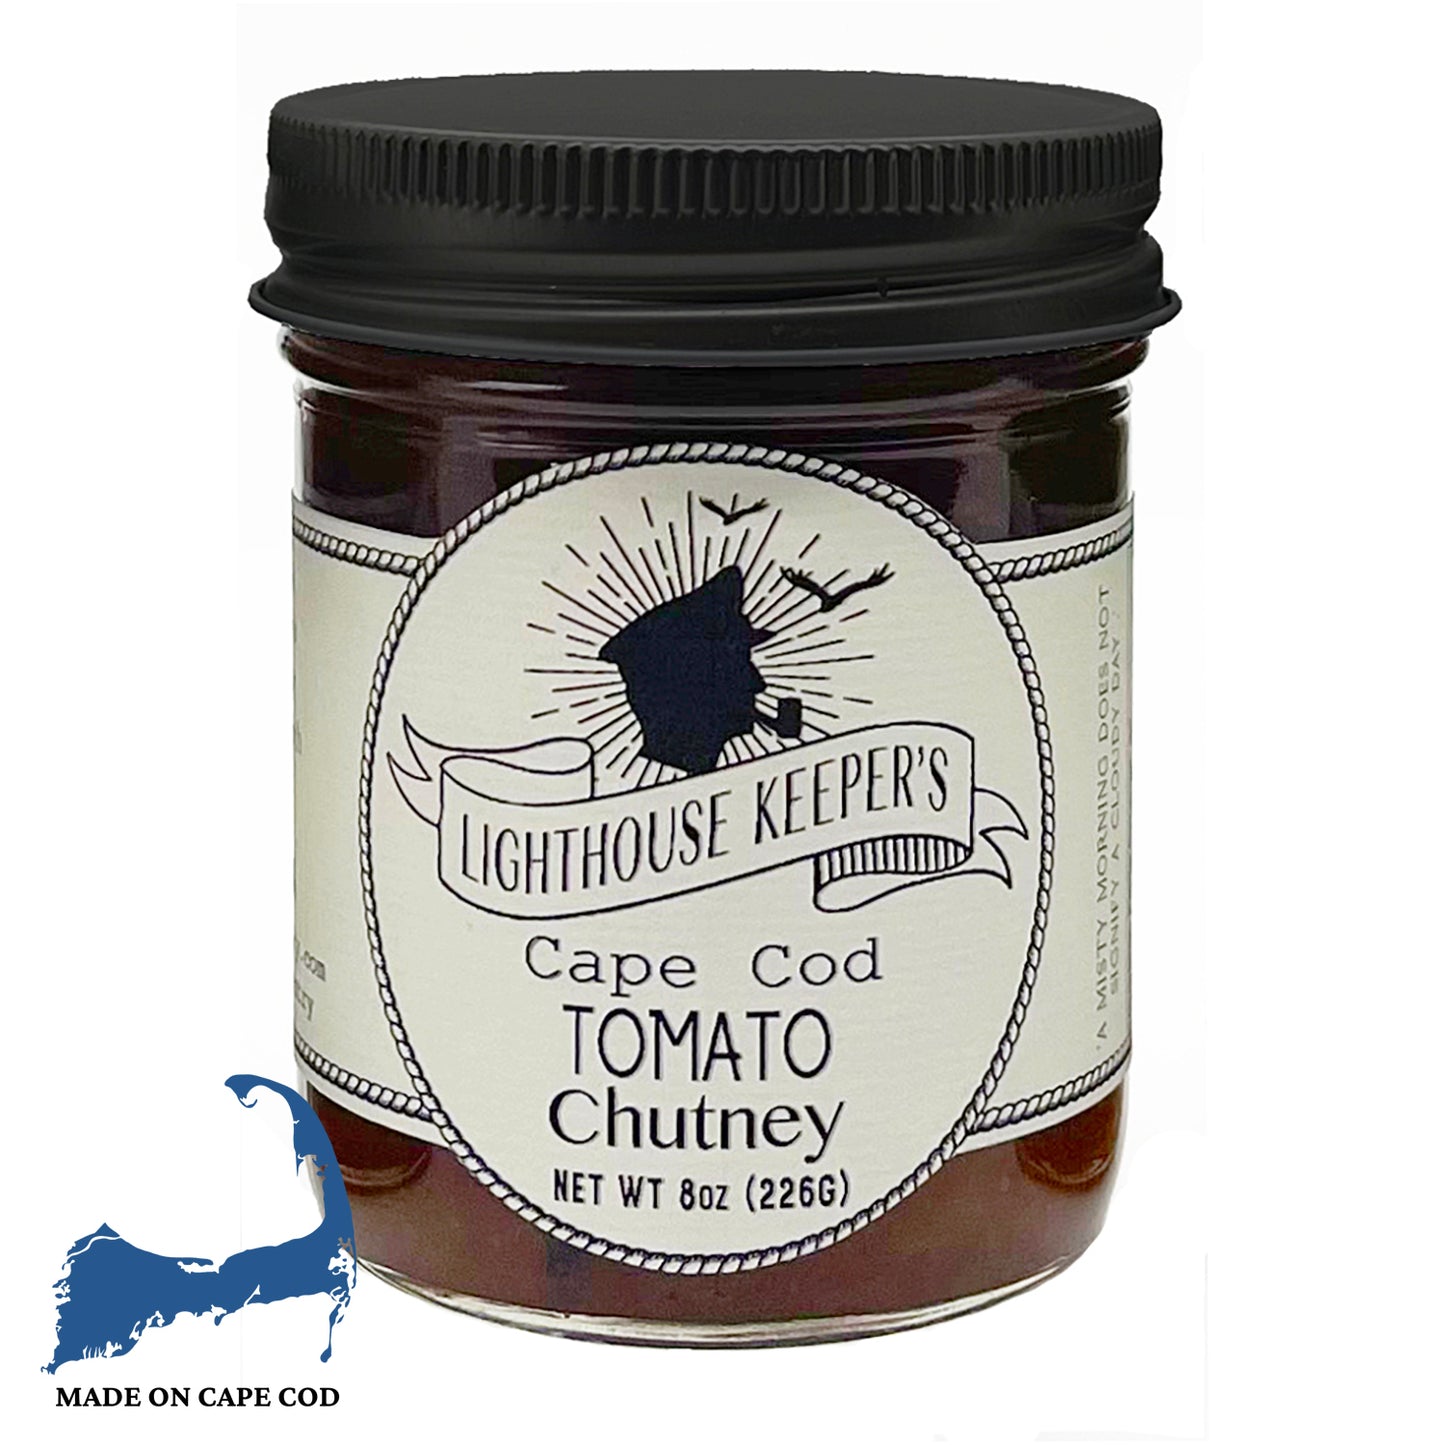 Cape Cod Tomato Chutney - Lighthouse Keepers Pantry